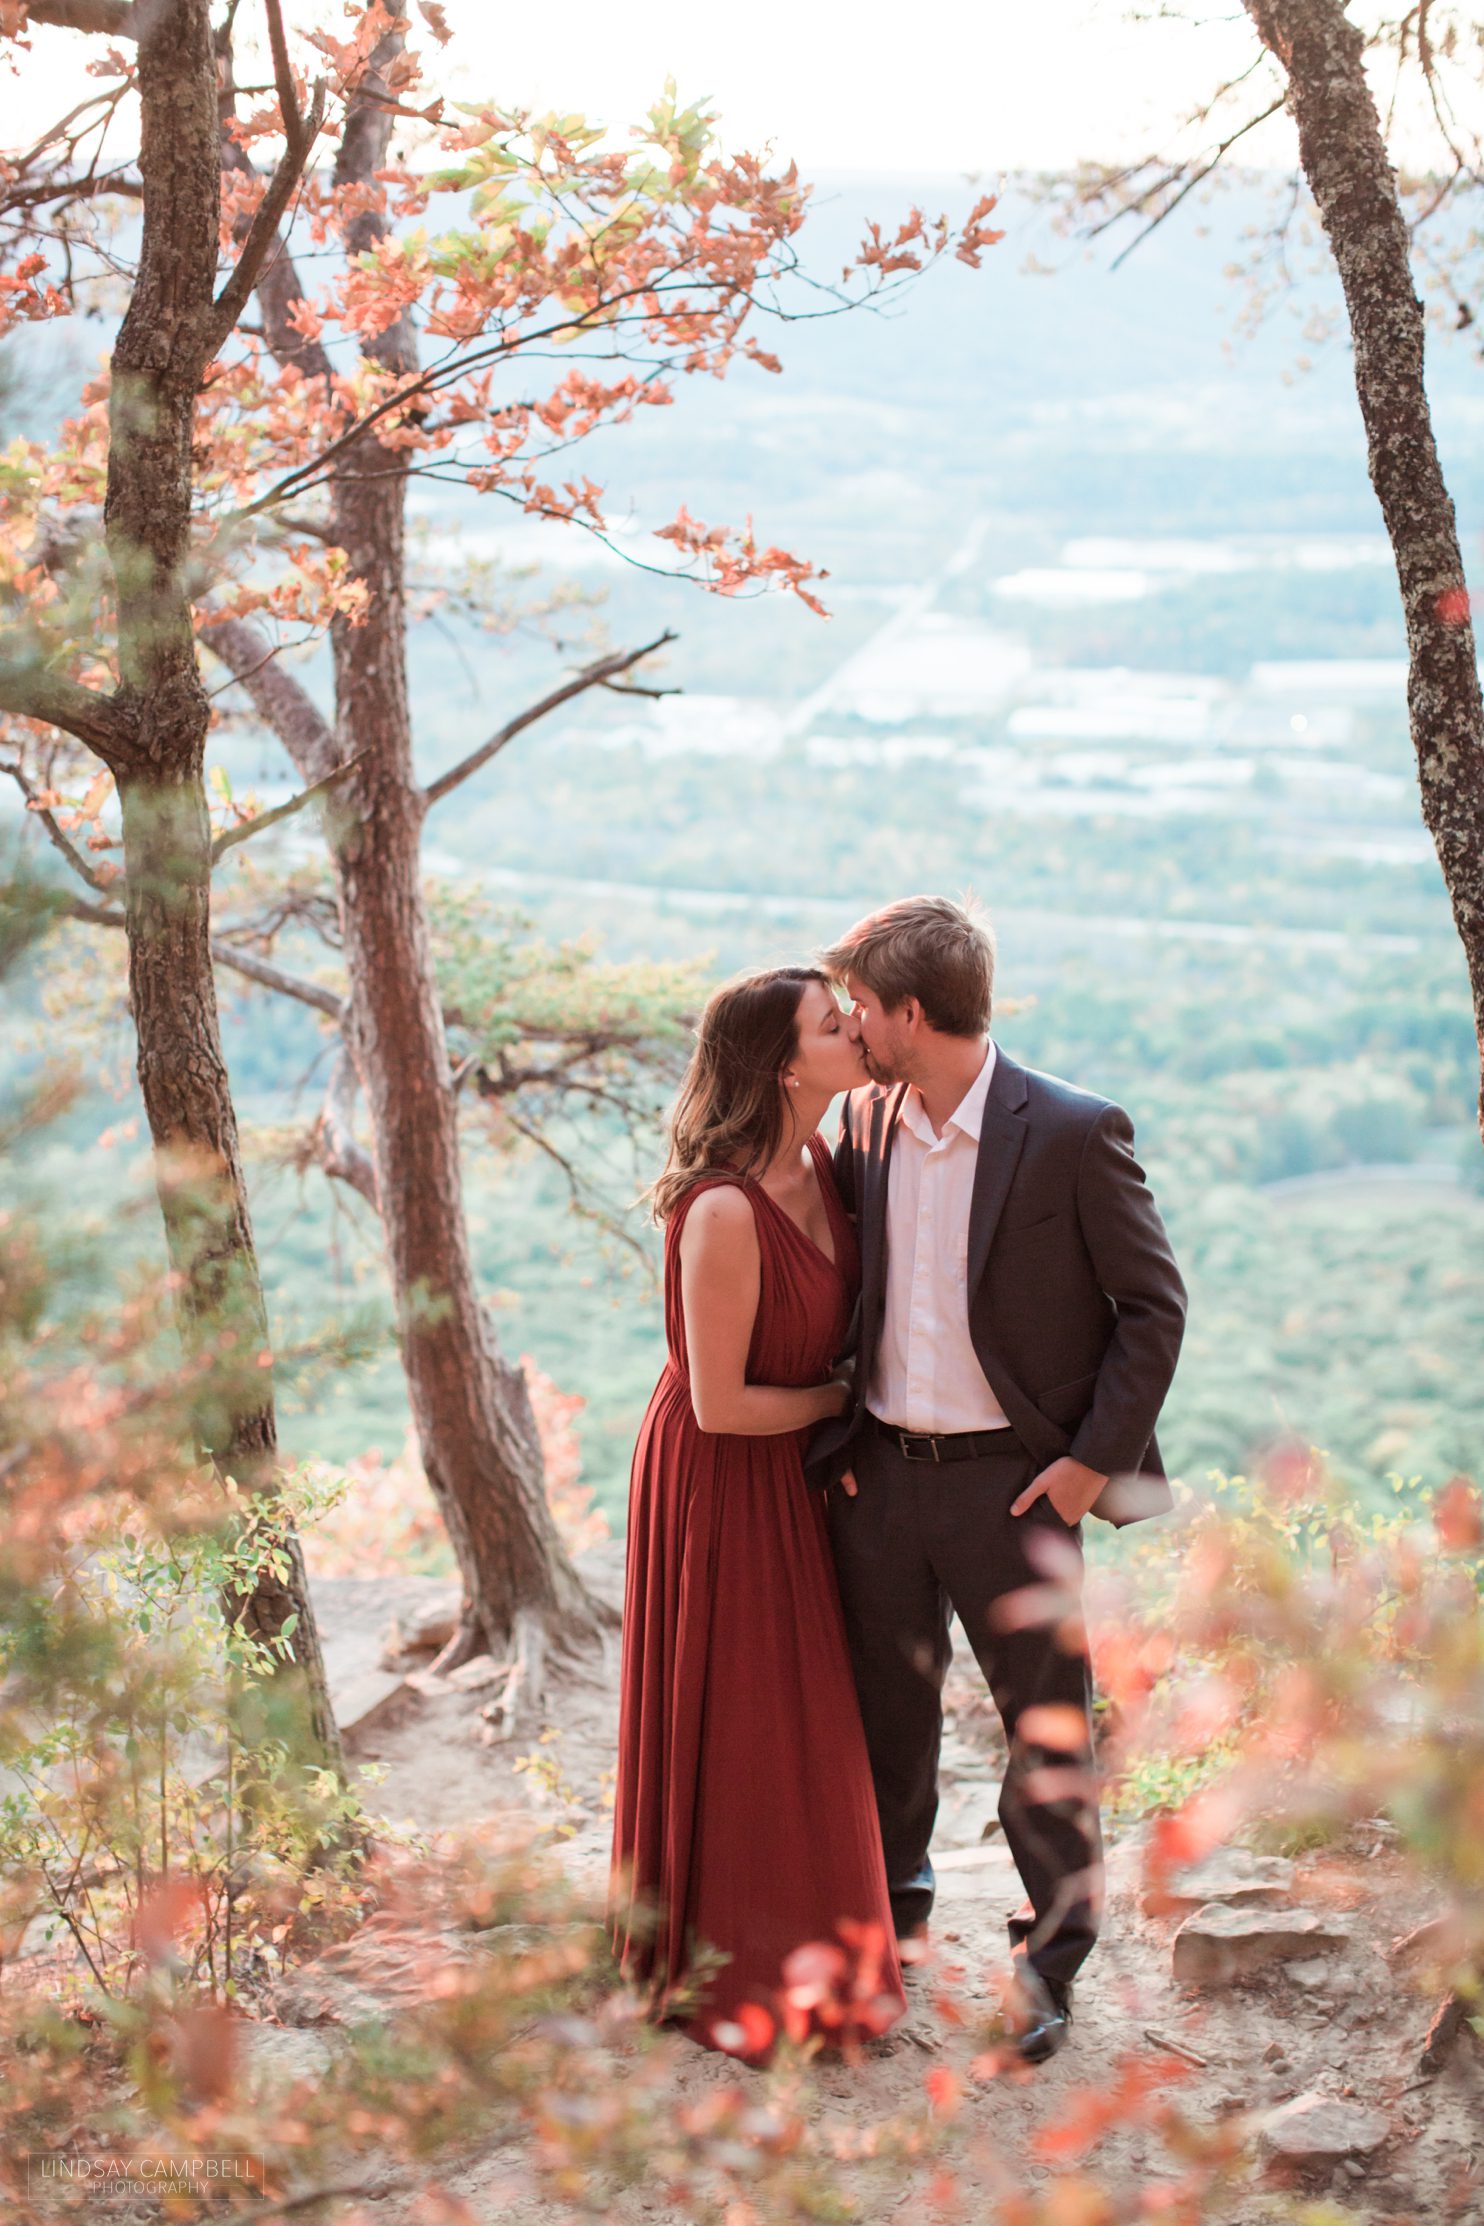 Kat-and-Tyler-Chattanooga-Engagement-Session-Lookout-Mountain-Engagement-photos-chattanooga-wedding-photographer_0038 Kat + Tyler's Lifestyle Engagement Session in Chattanooga